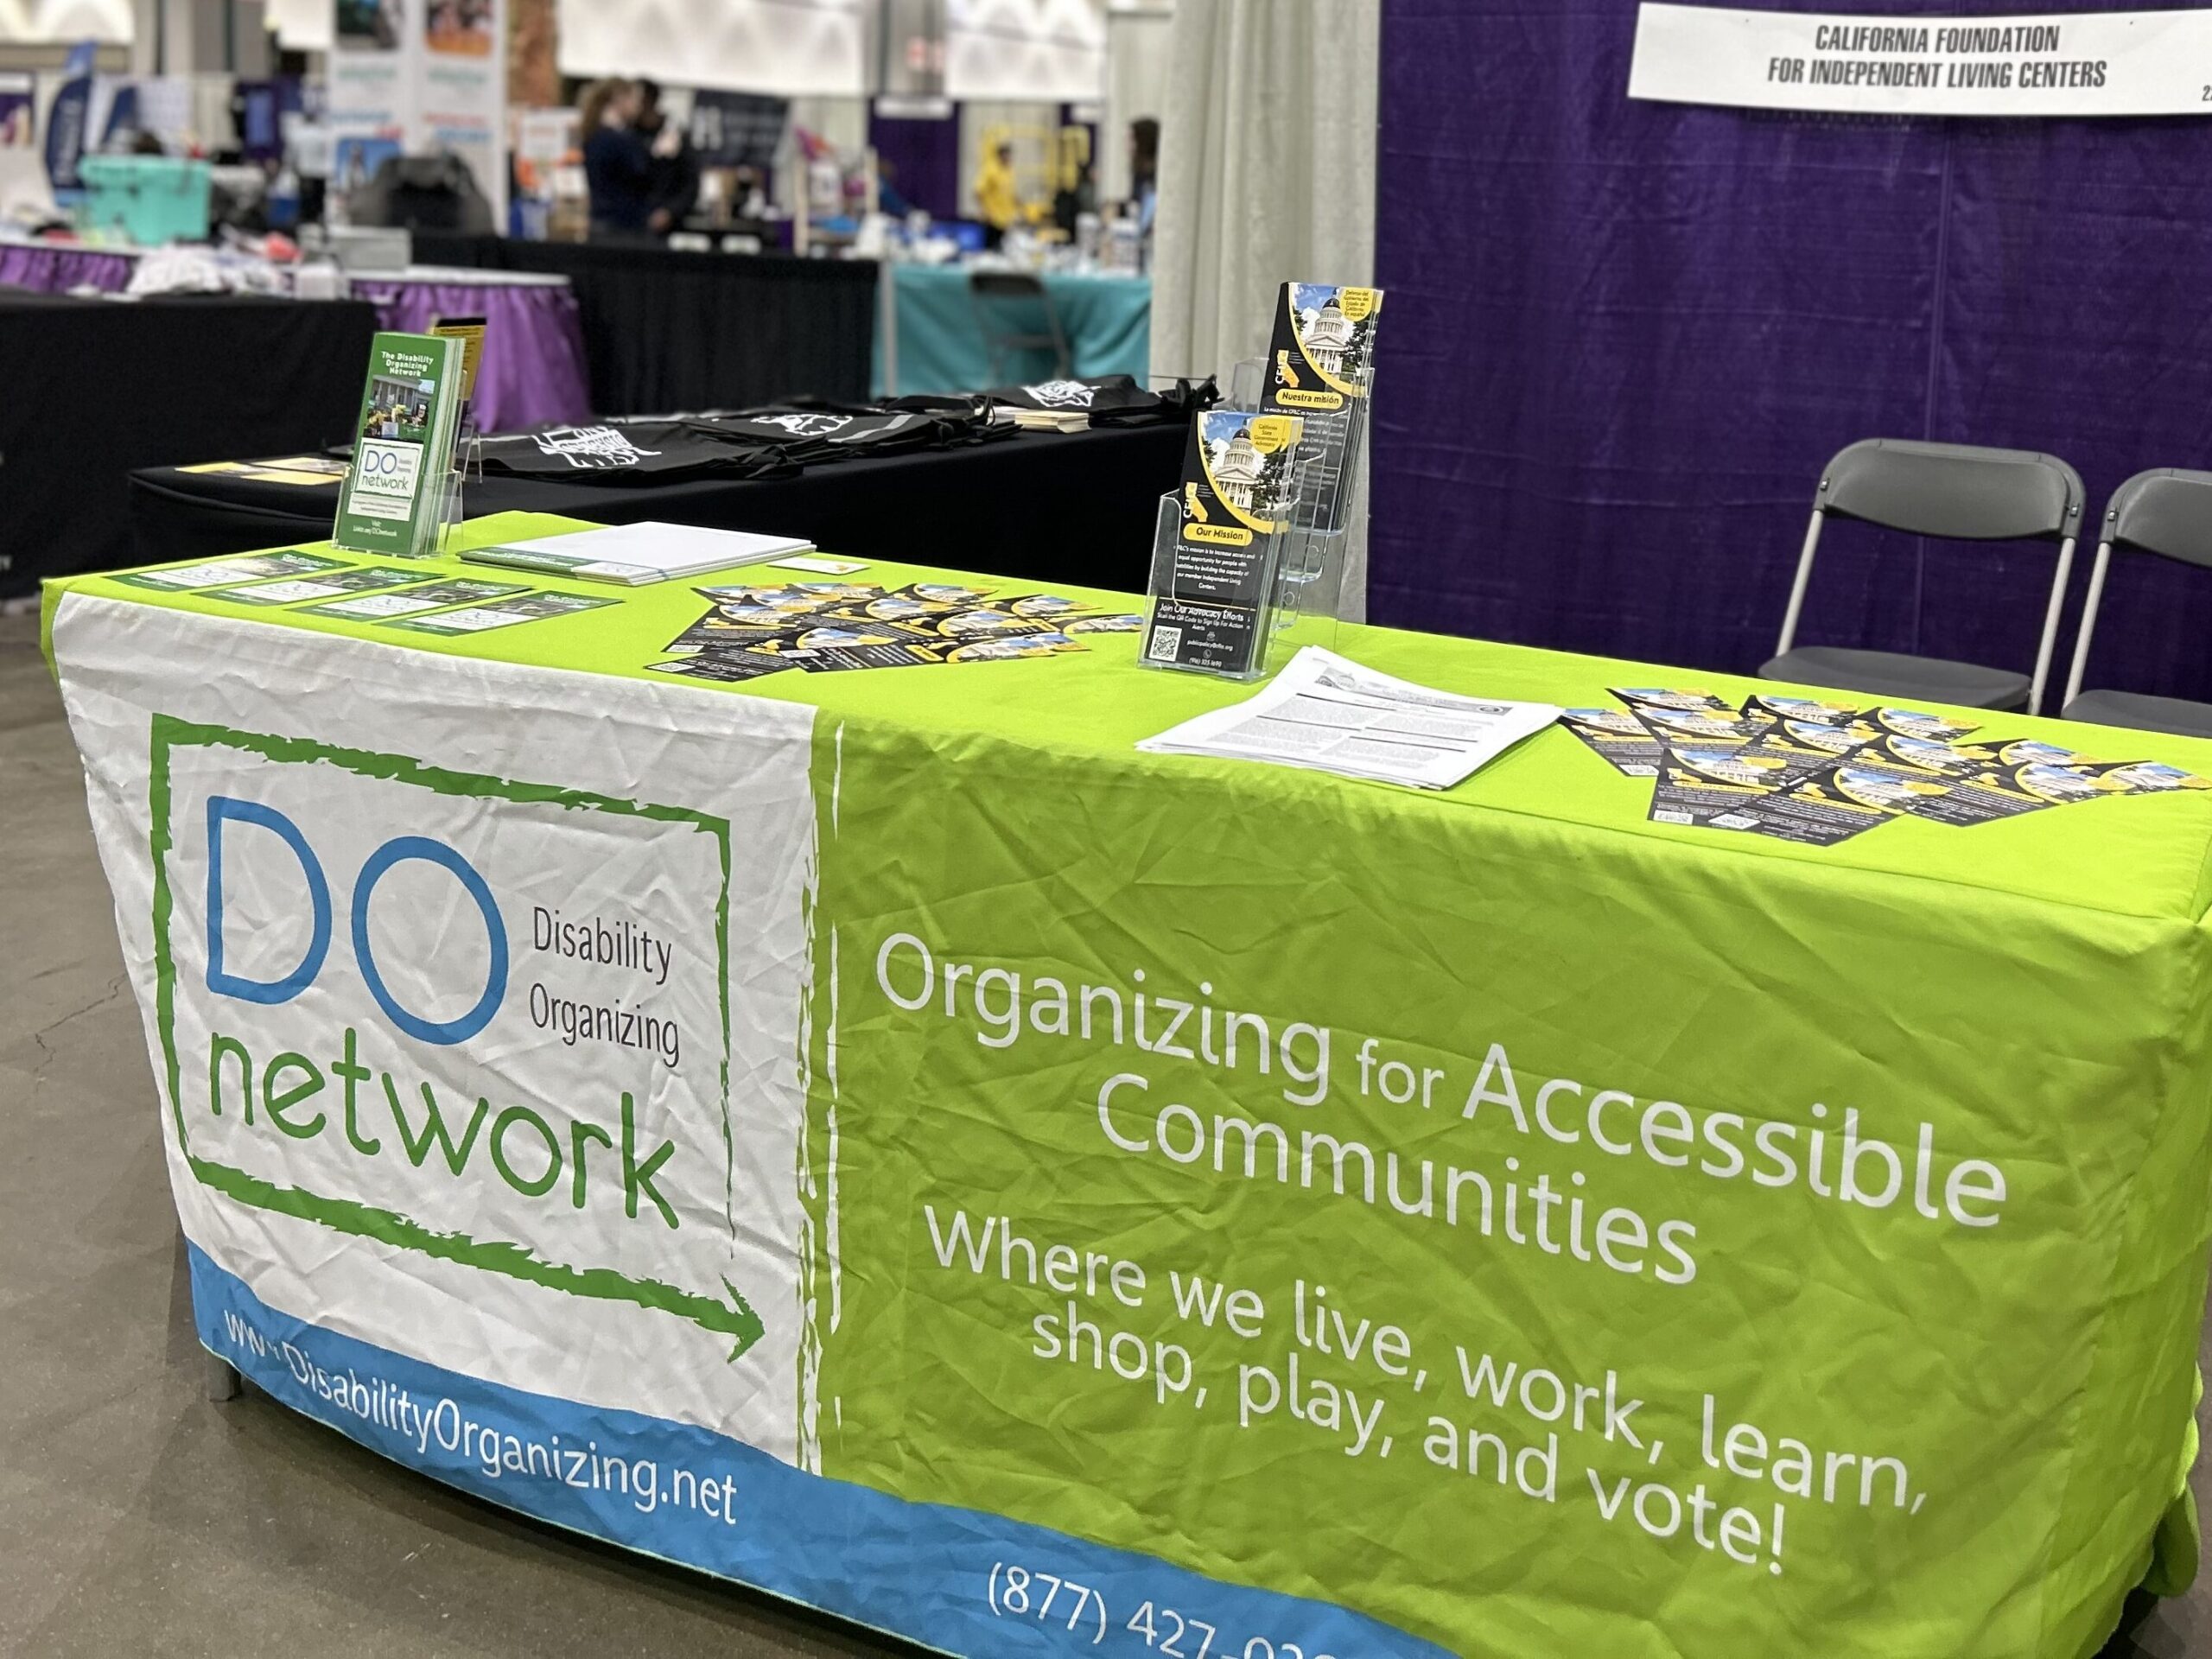 A table with a bright green, blue and white tablecloth displays flyers and sheets of paper. The words "DO Network Disability Organizing) and on the green is "Organizing for Accessible Communities Where we live, work, learn, shop, play and vote!" are across the front of the tablecloth.